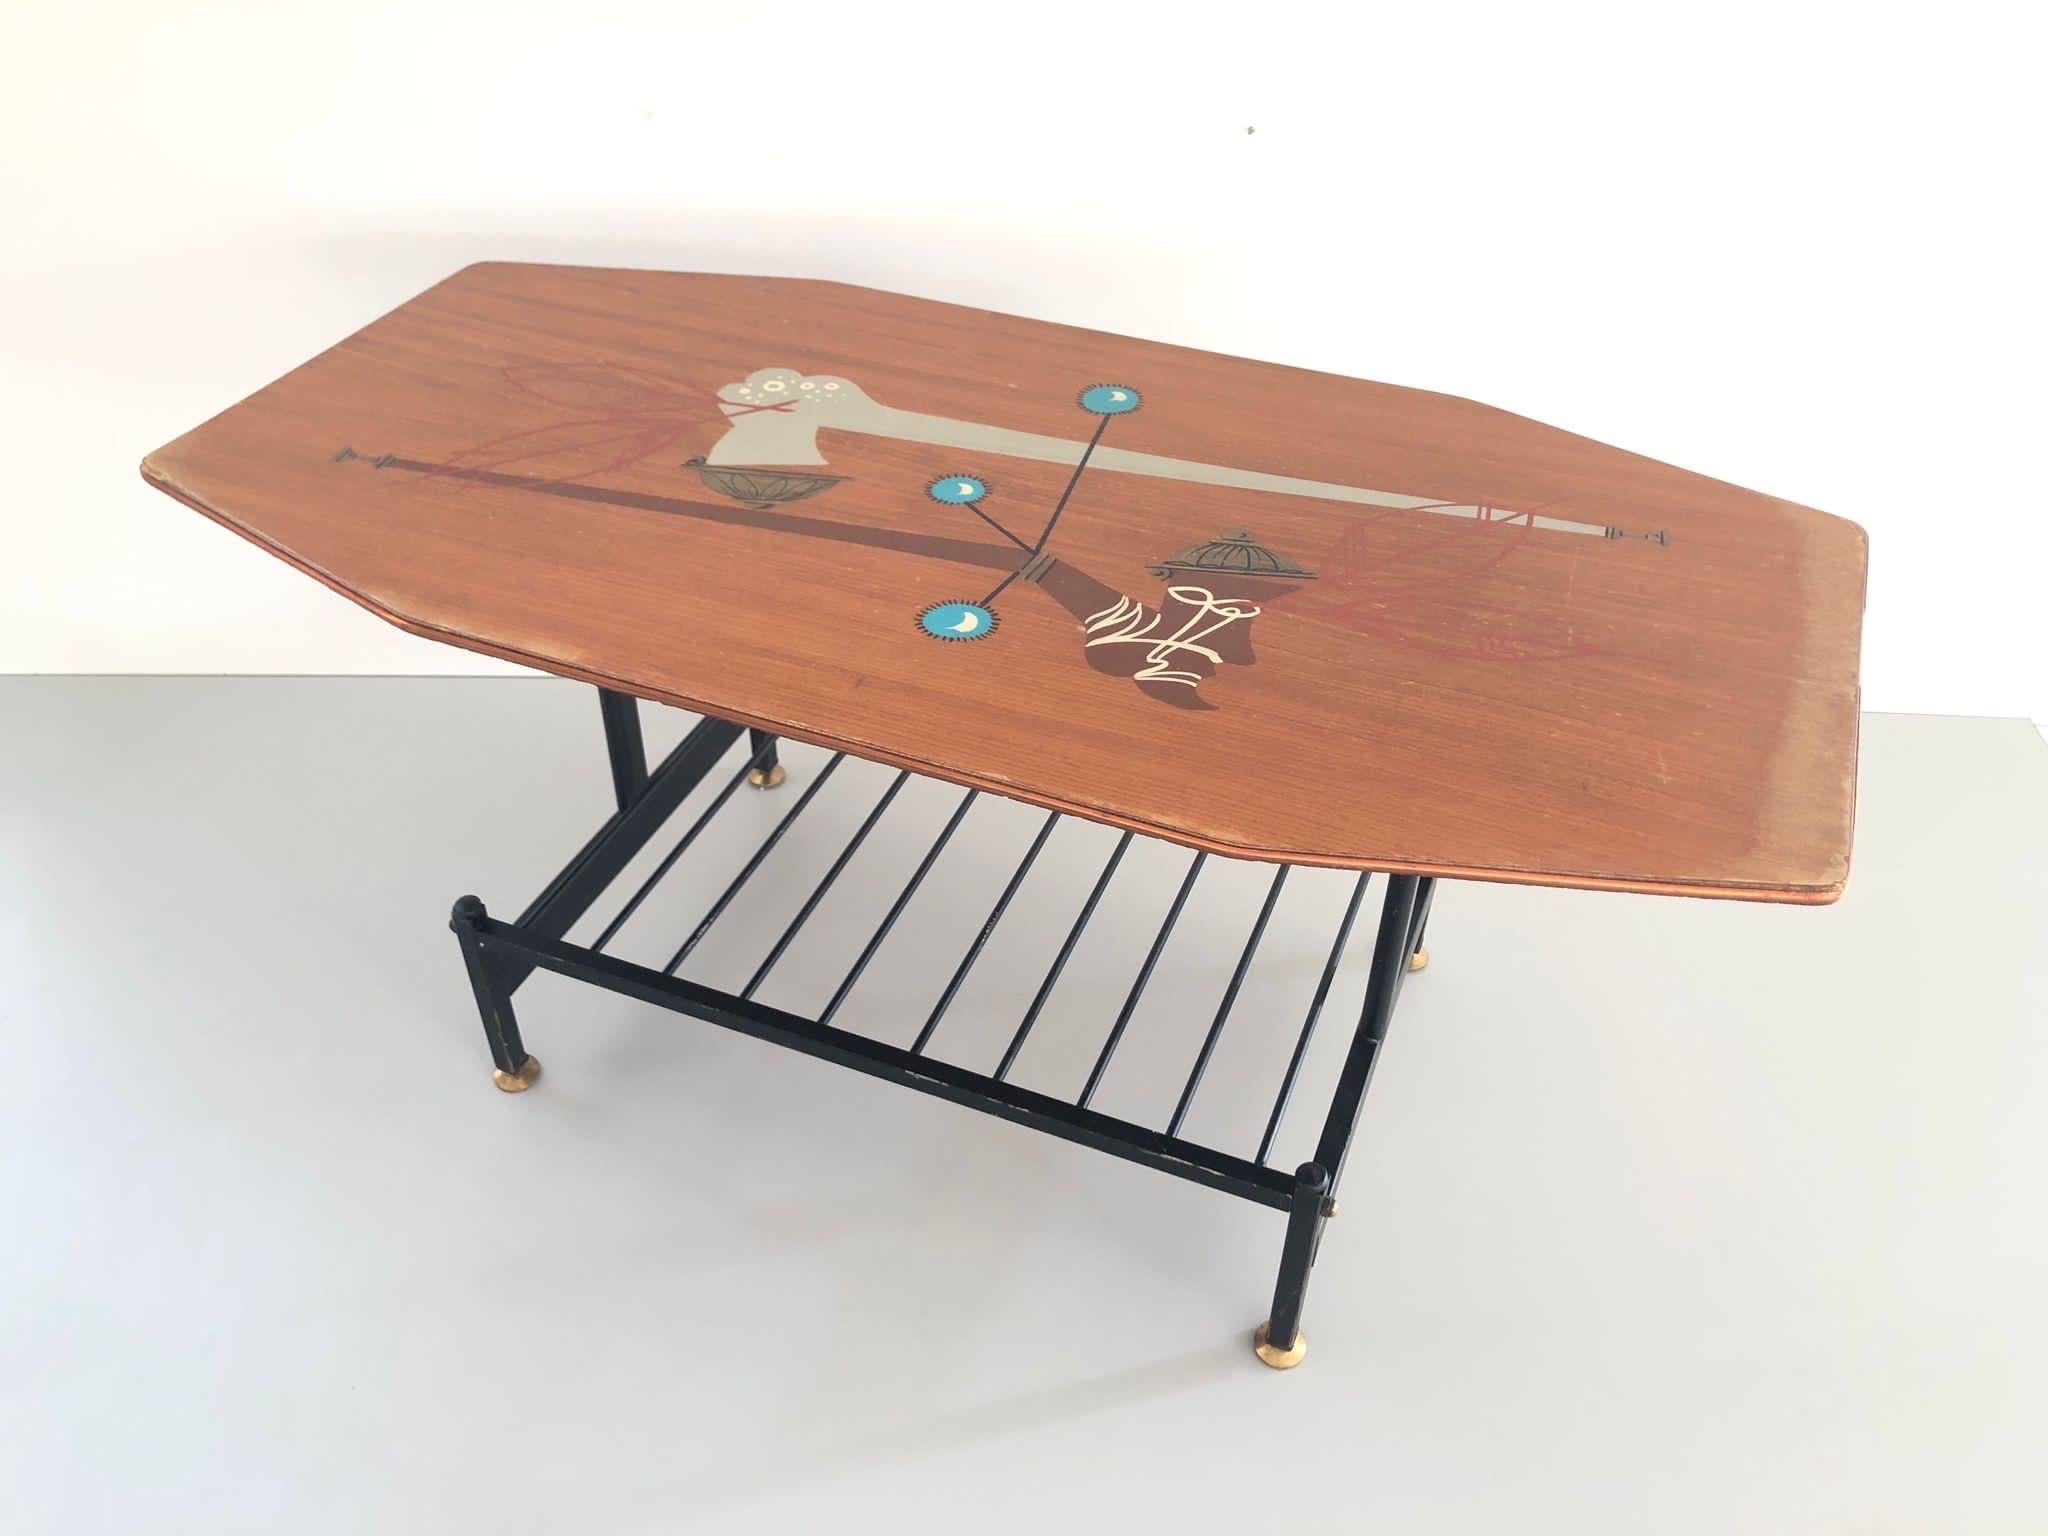 Hand-painted Illustrated Wood Coffee or Center Table, 1950s, Italy In Good Condition For Sale In Hagenbach, DE